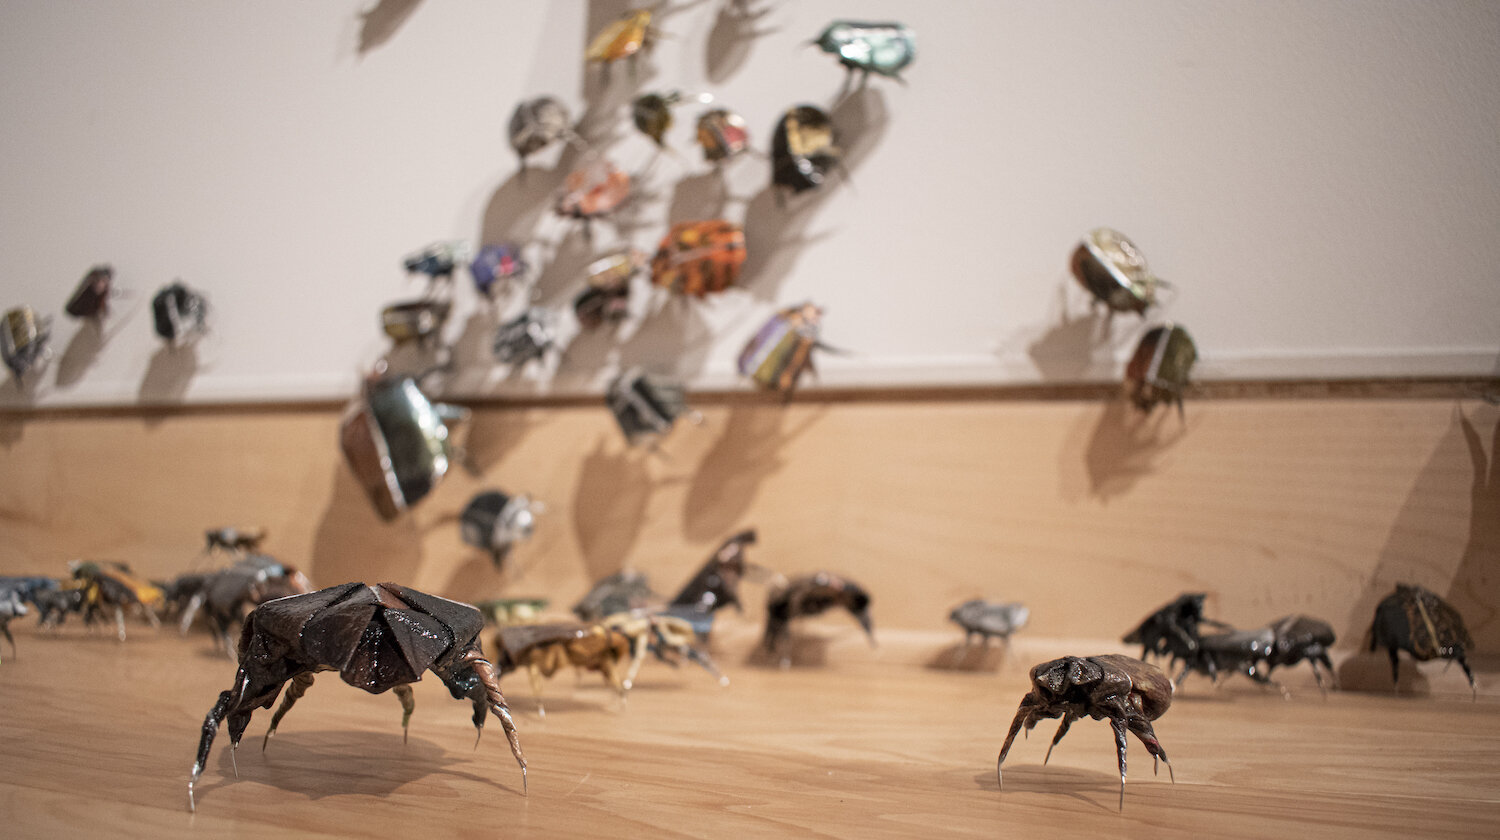    All That I Love   (detail), origami beetles made from photographs 